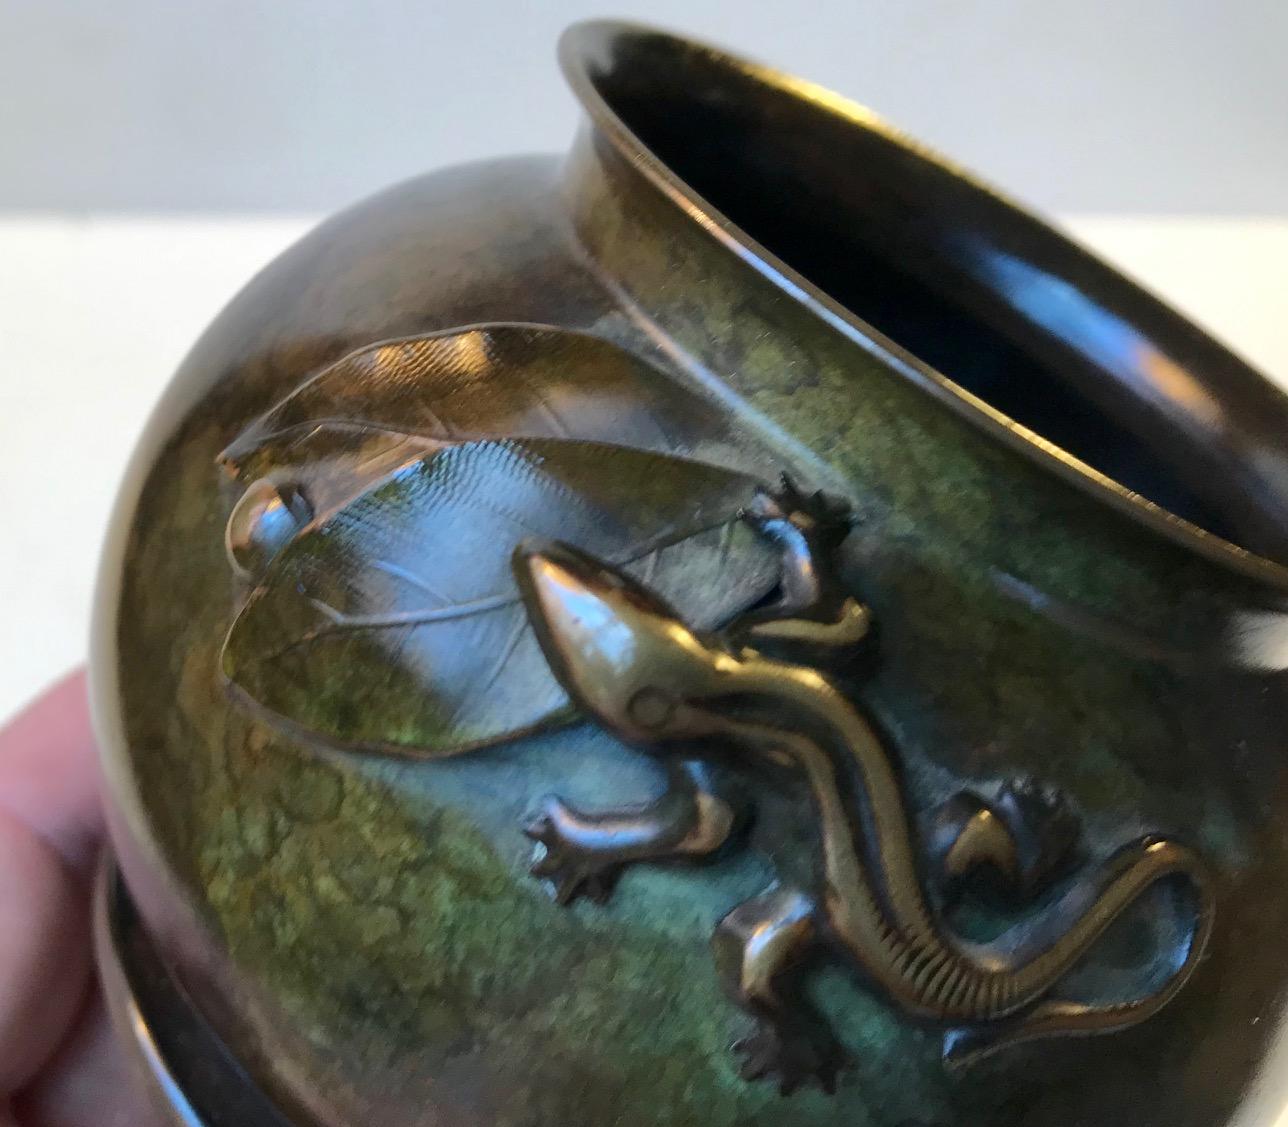 Danish 1930s interpretation of Japanese Meiji period where snakes, lizards and crocodiles were configured upon organically shaped and rather 'modernistic' bronze vases and bowls. This small vase was designed and manufactured by Holger Fredericia -